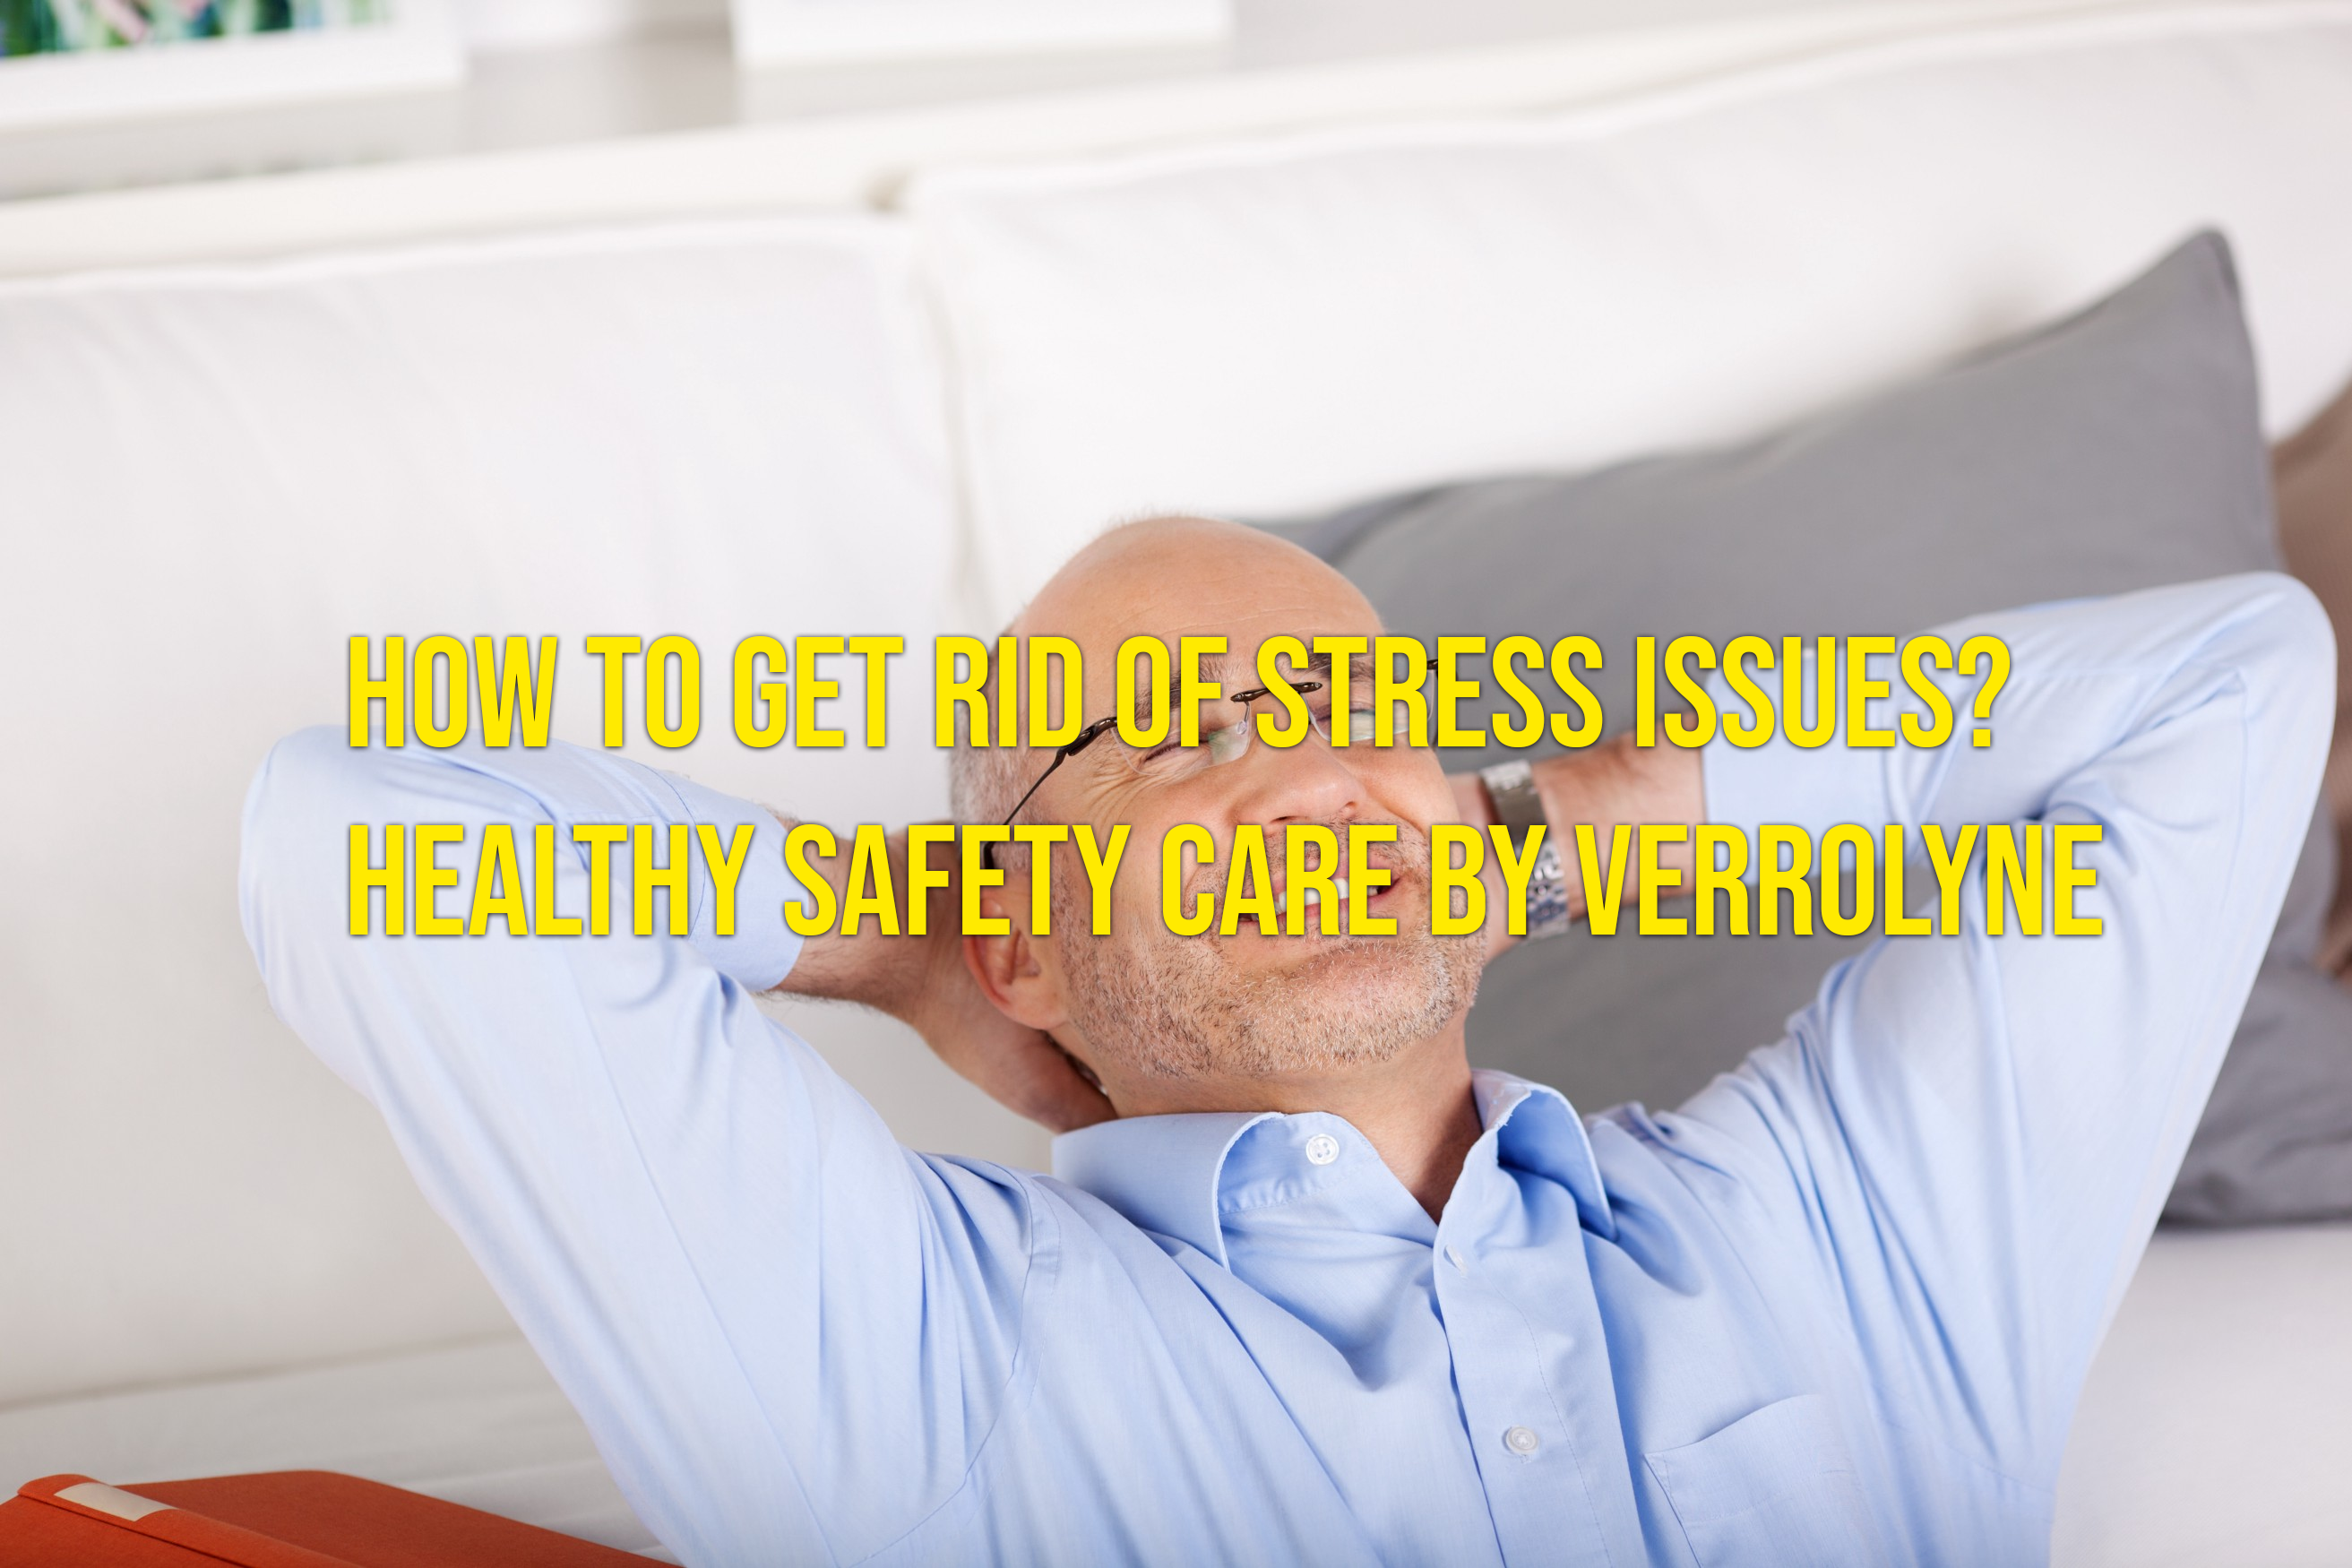 How to Get Rid of Stress Issues? Healthy Safety Care by Verrolyne